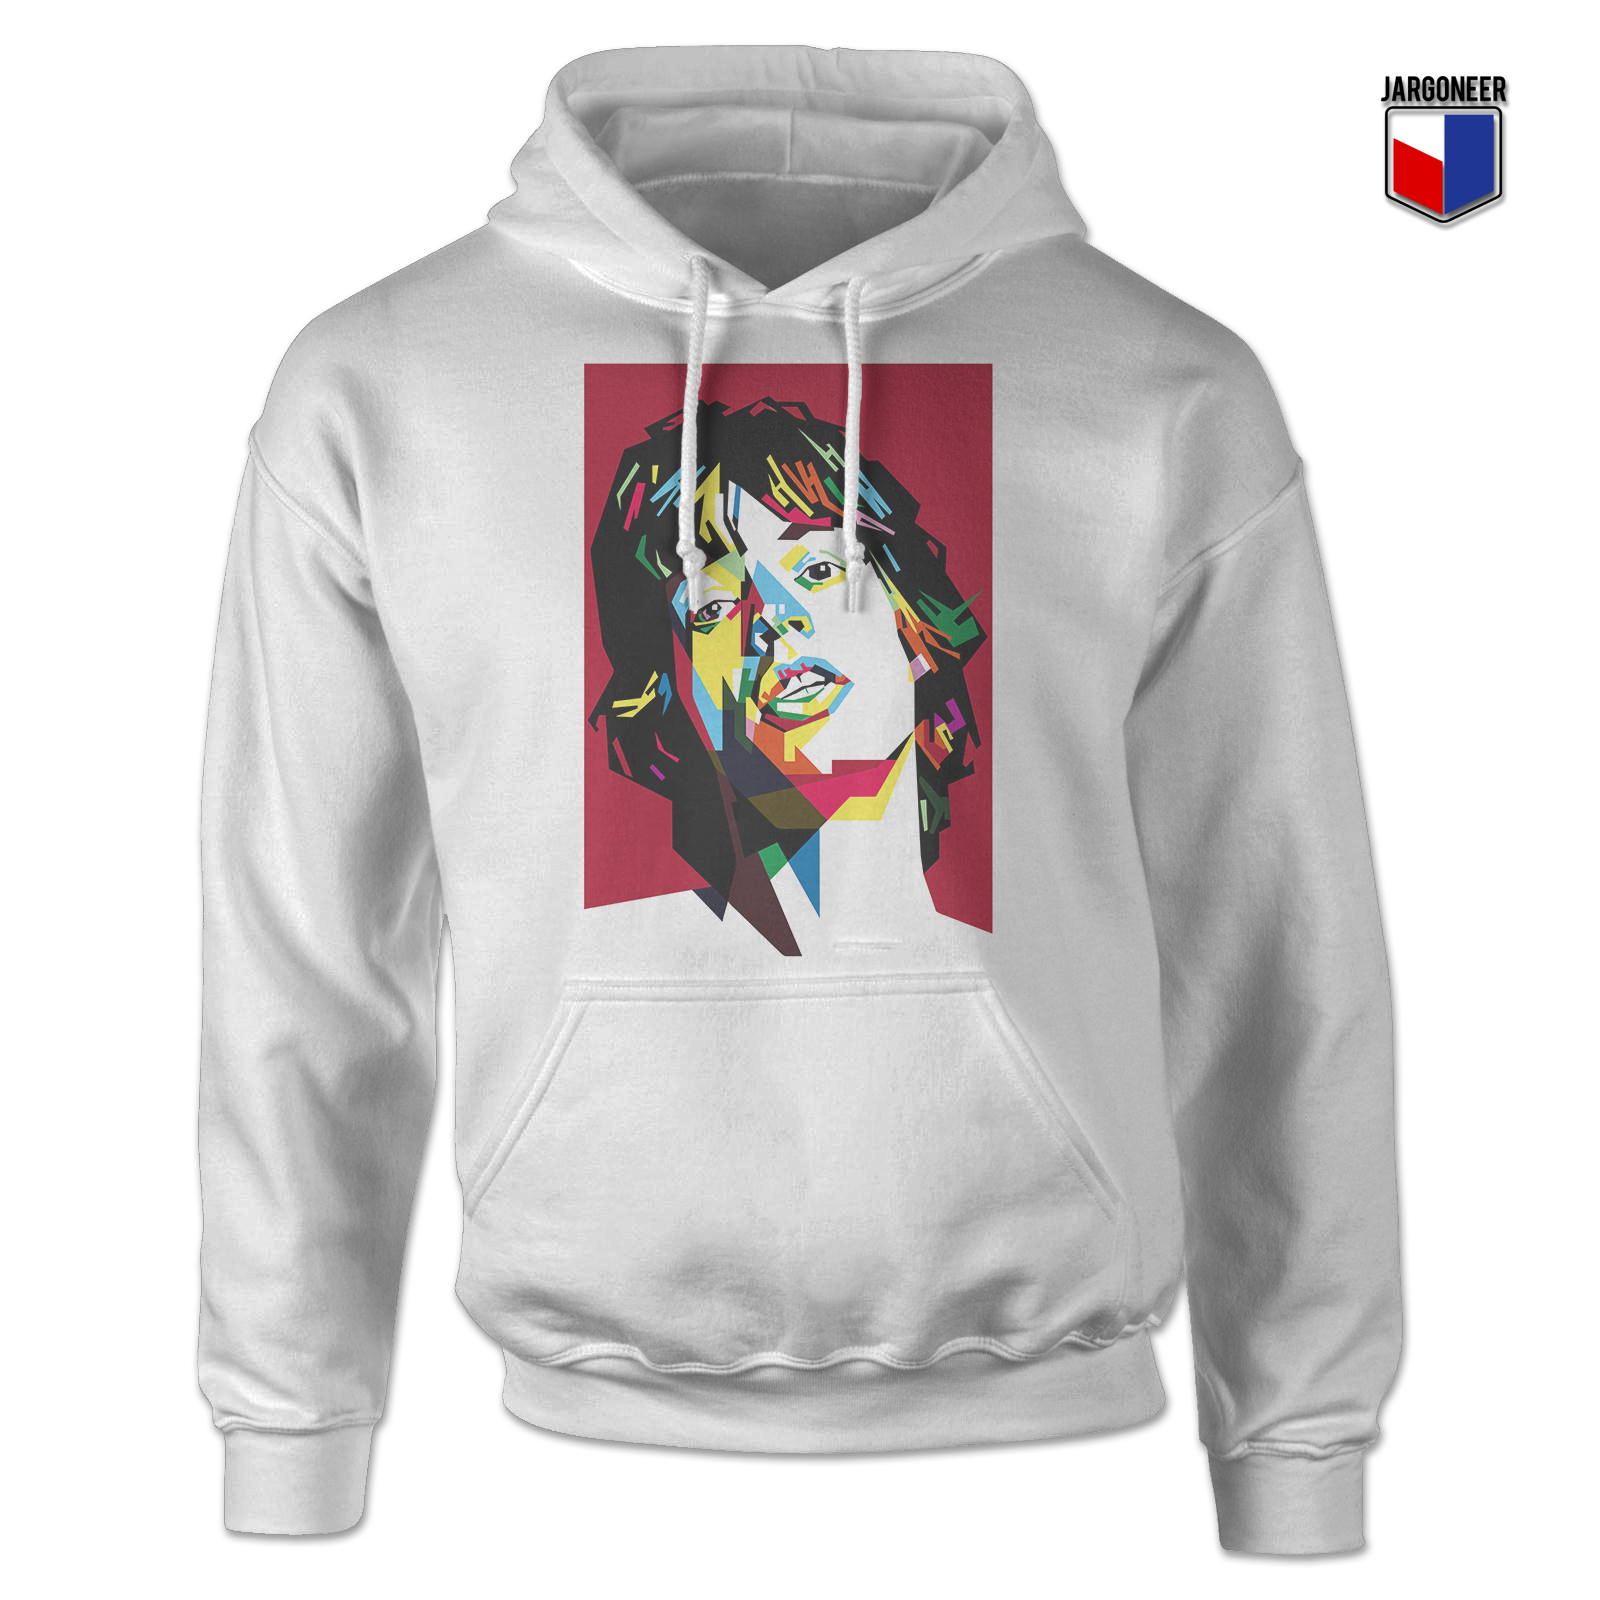 Red Jagger White Hoody - Shop Unique Graphic Cool Shirt Designs